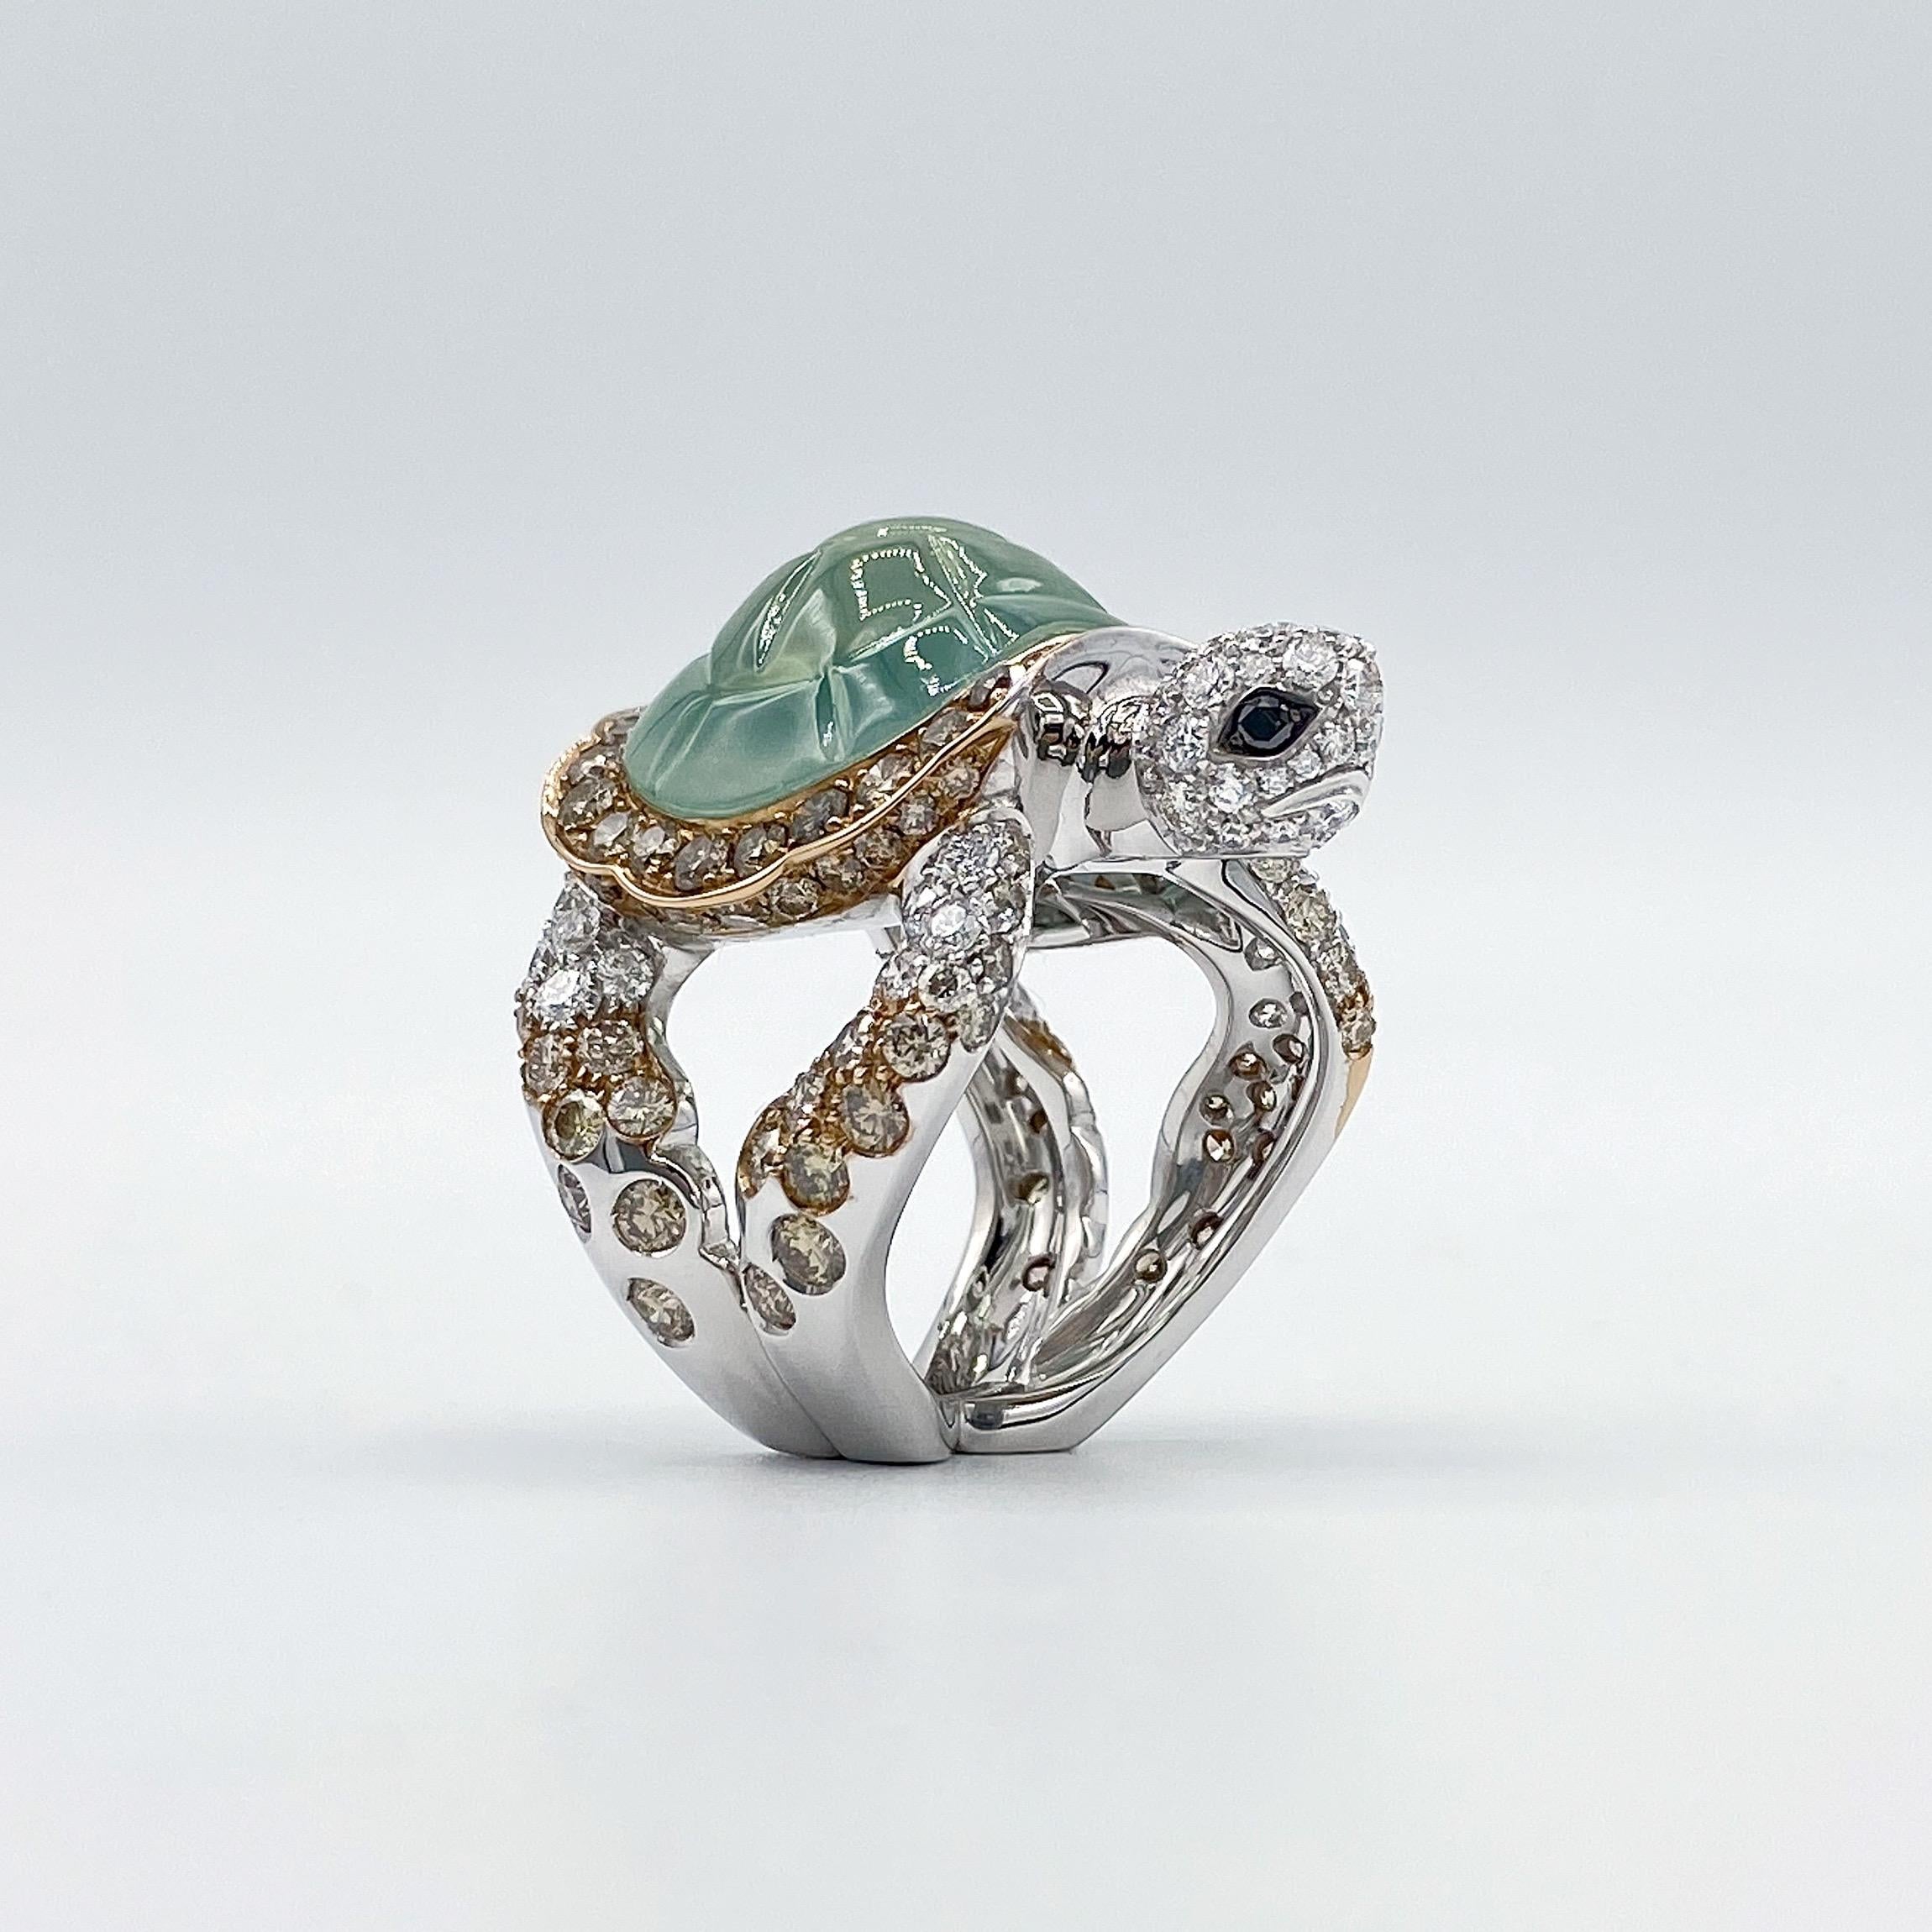 This is a very beautiful white gold ring with white, brown and black (their eyes) diamonds.
The 'armour' of the carapace is a sage green hard rock called Prehnite, cut and engraved by hand.
The total carat is 5,87 ct.
The size of the ring is 6 1/4